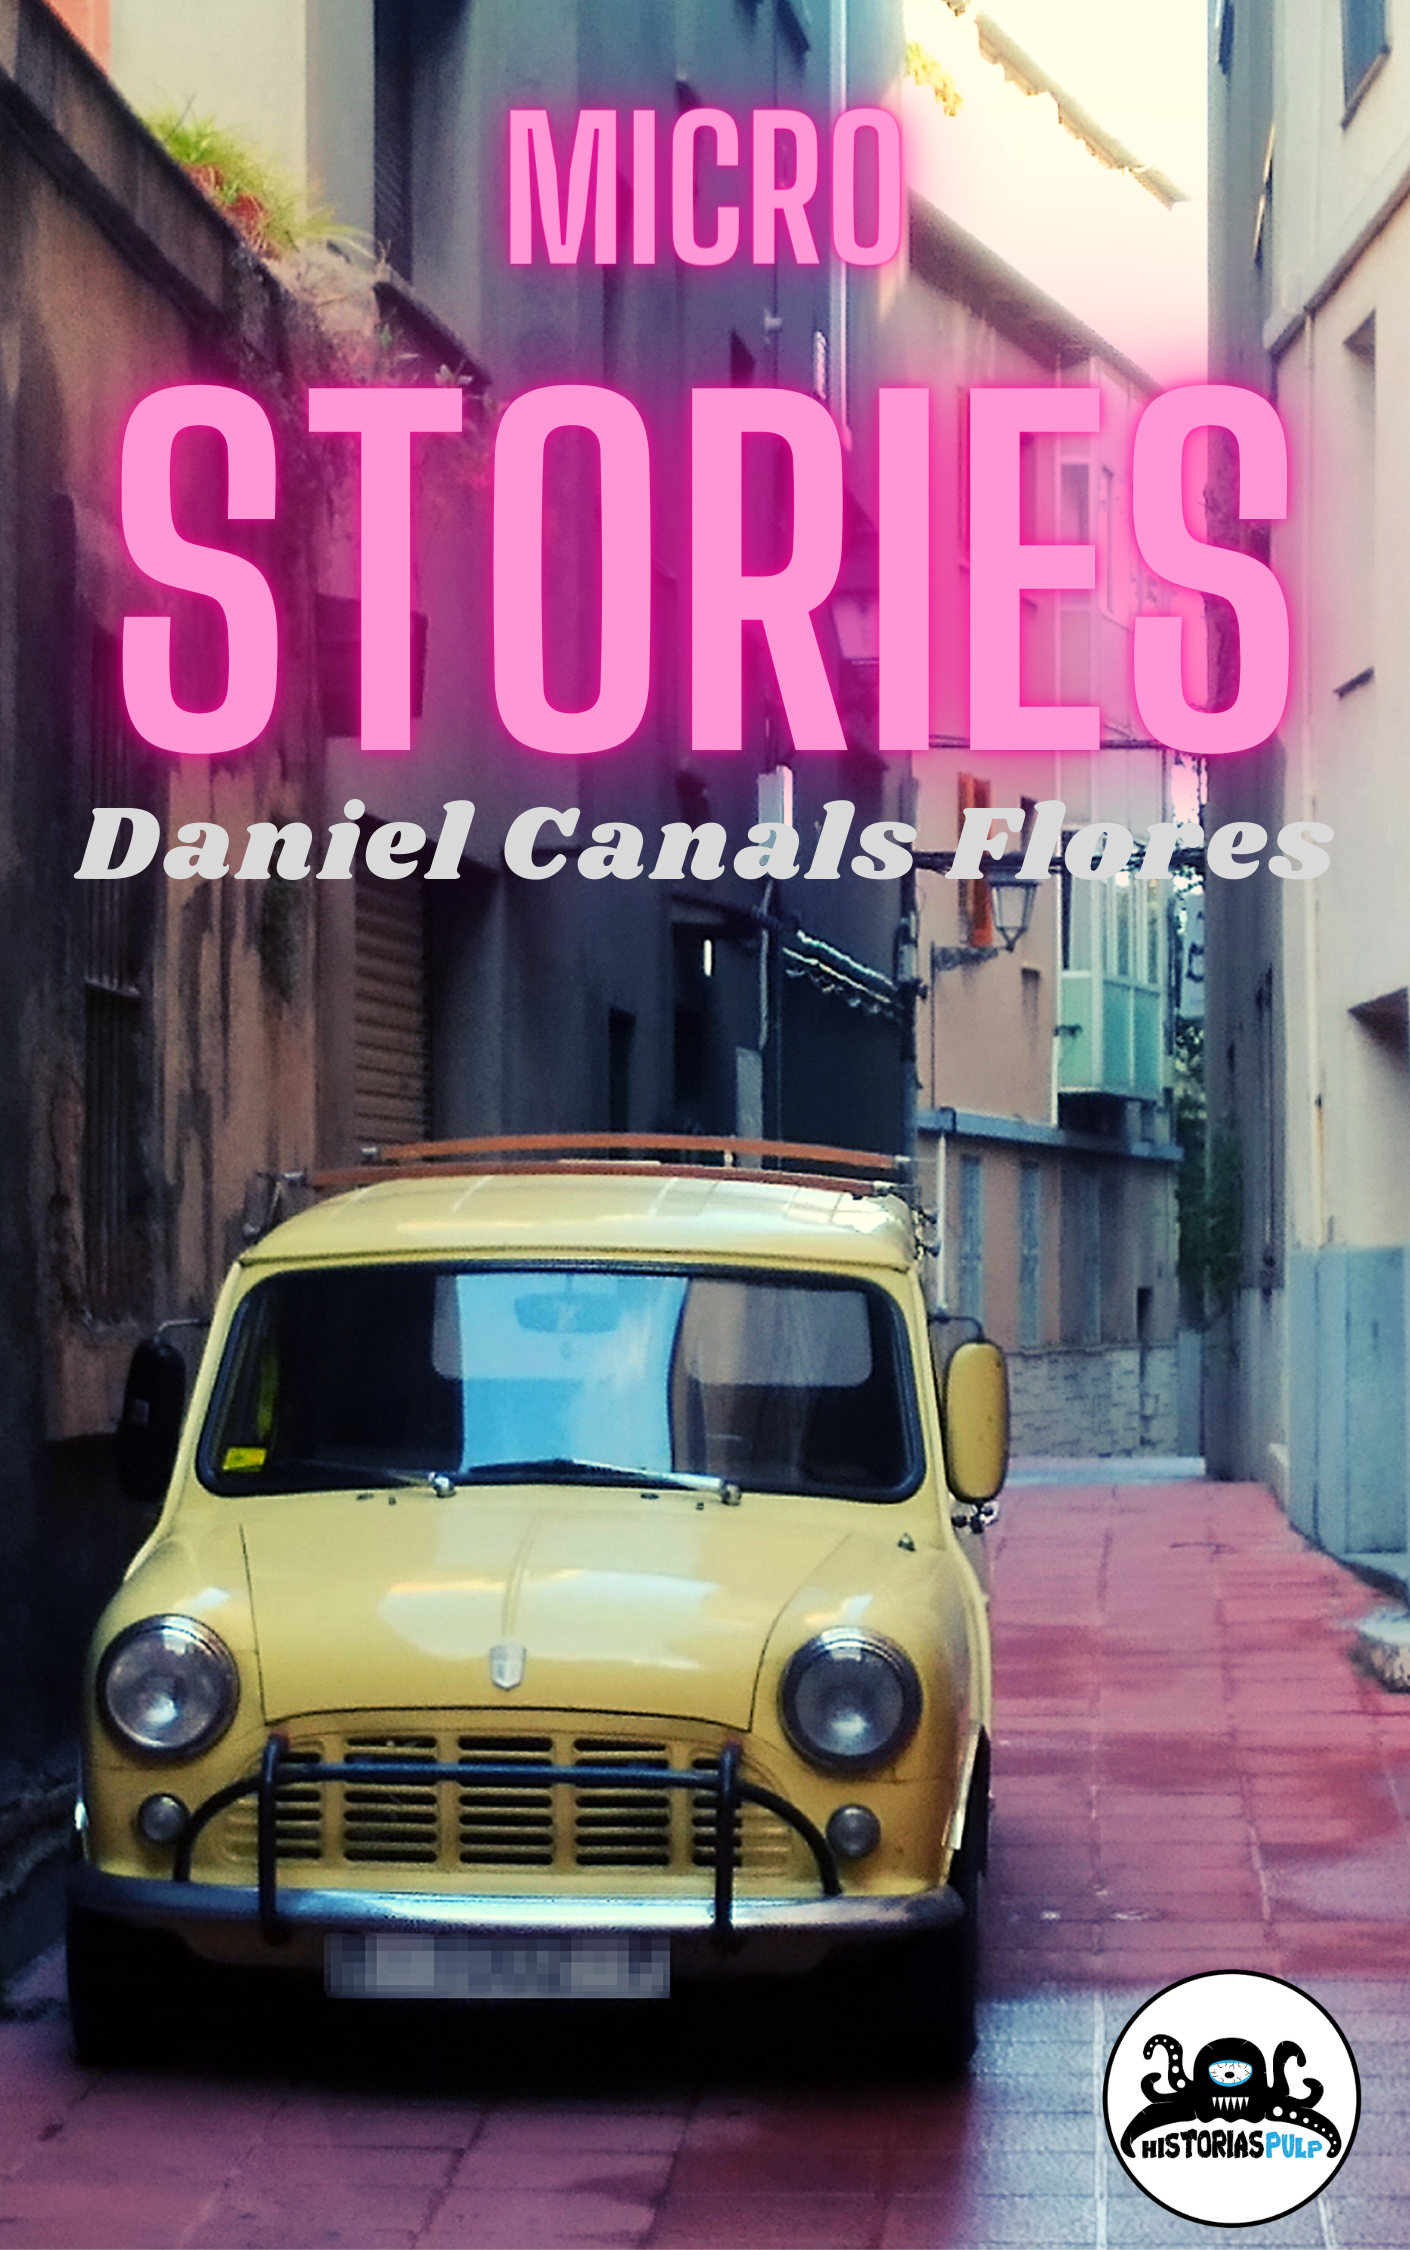 MICRO-STORIES, by Daniel Canals Flores